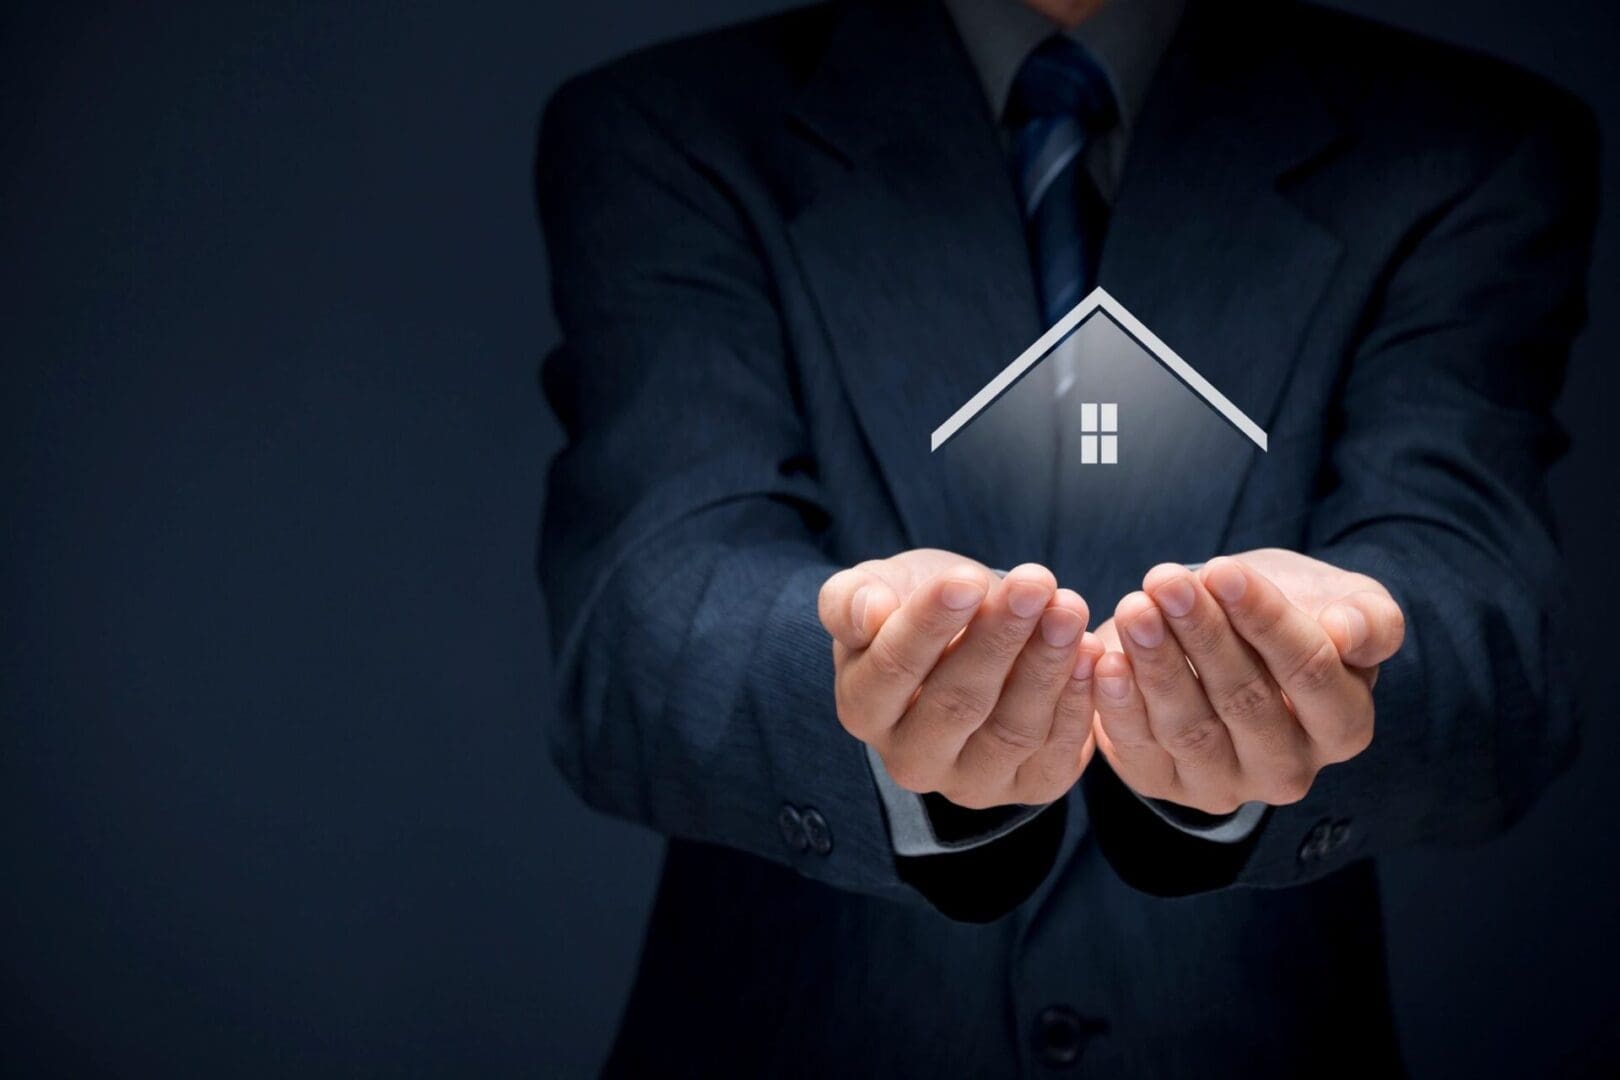 A person in a suit holding a graphical representation of a house in their hands.